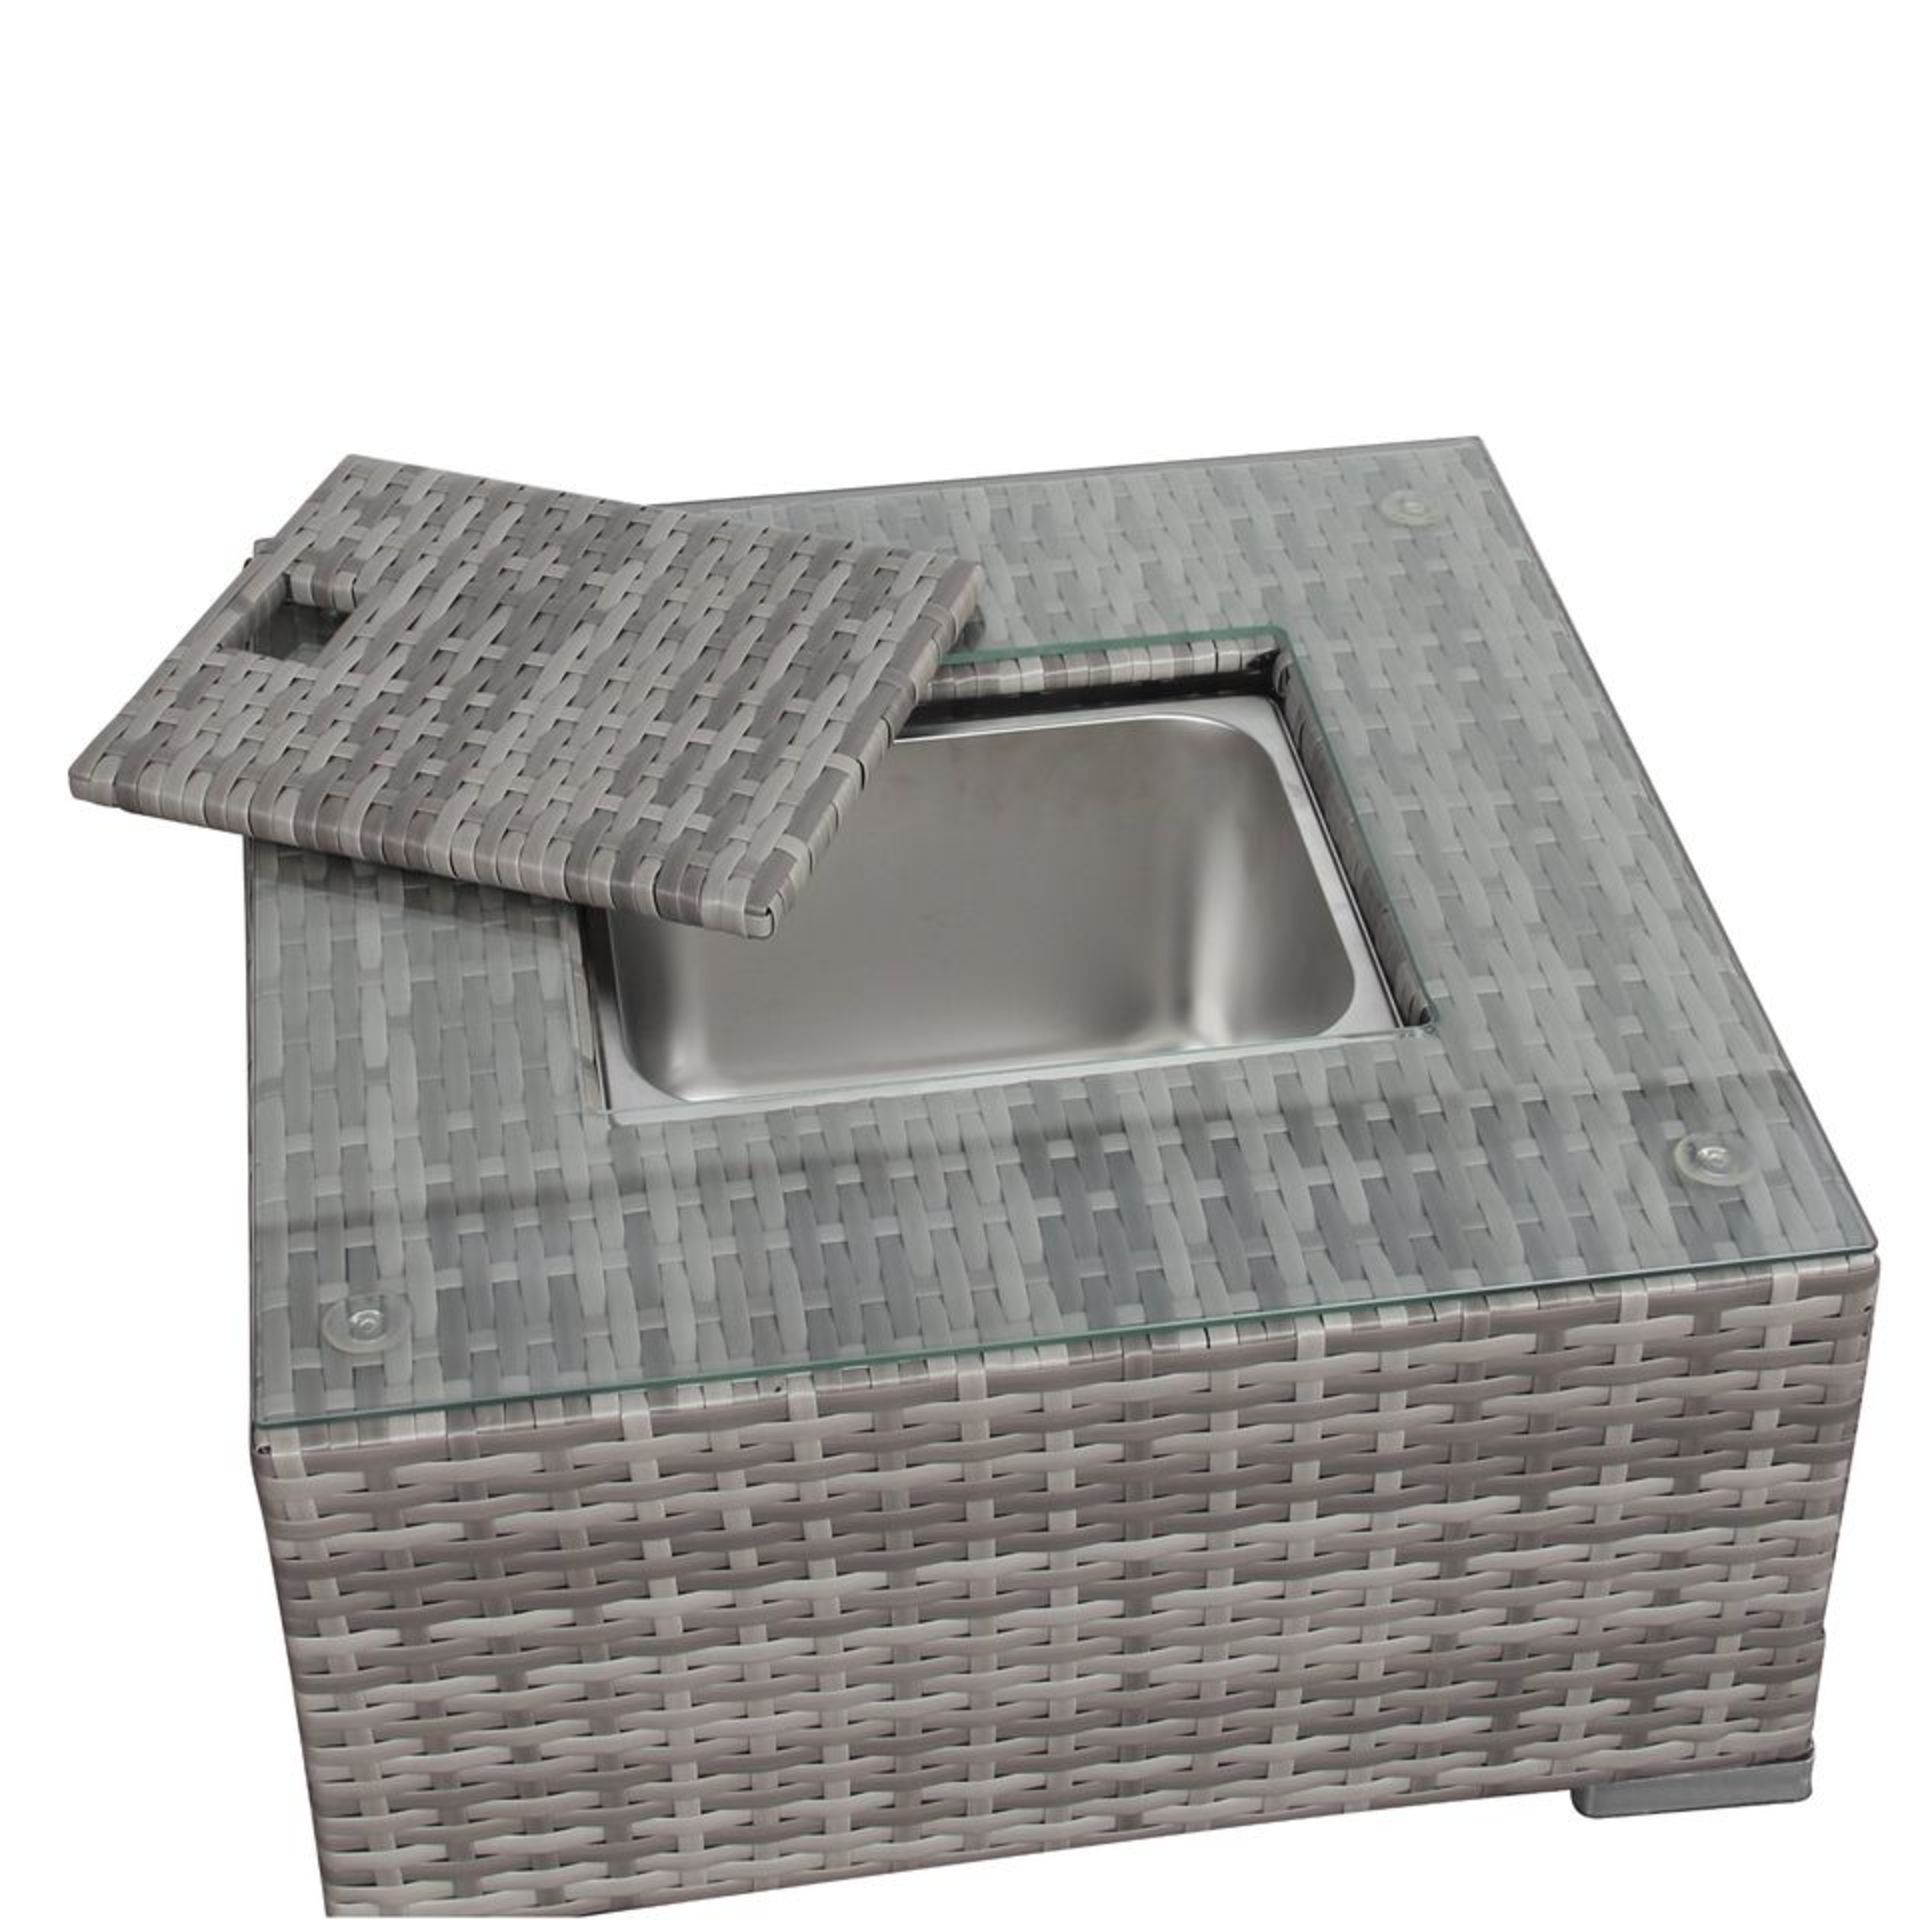 Brand new sets of garden furniture with ice storage box built into the table, RRP £999 *PLUS VAT* - Image 2 of 6